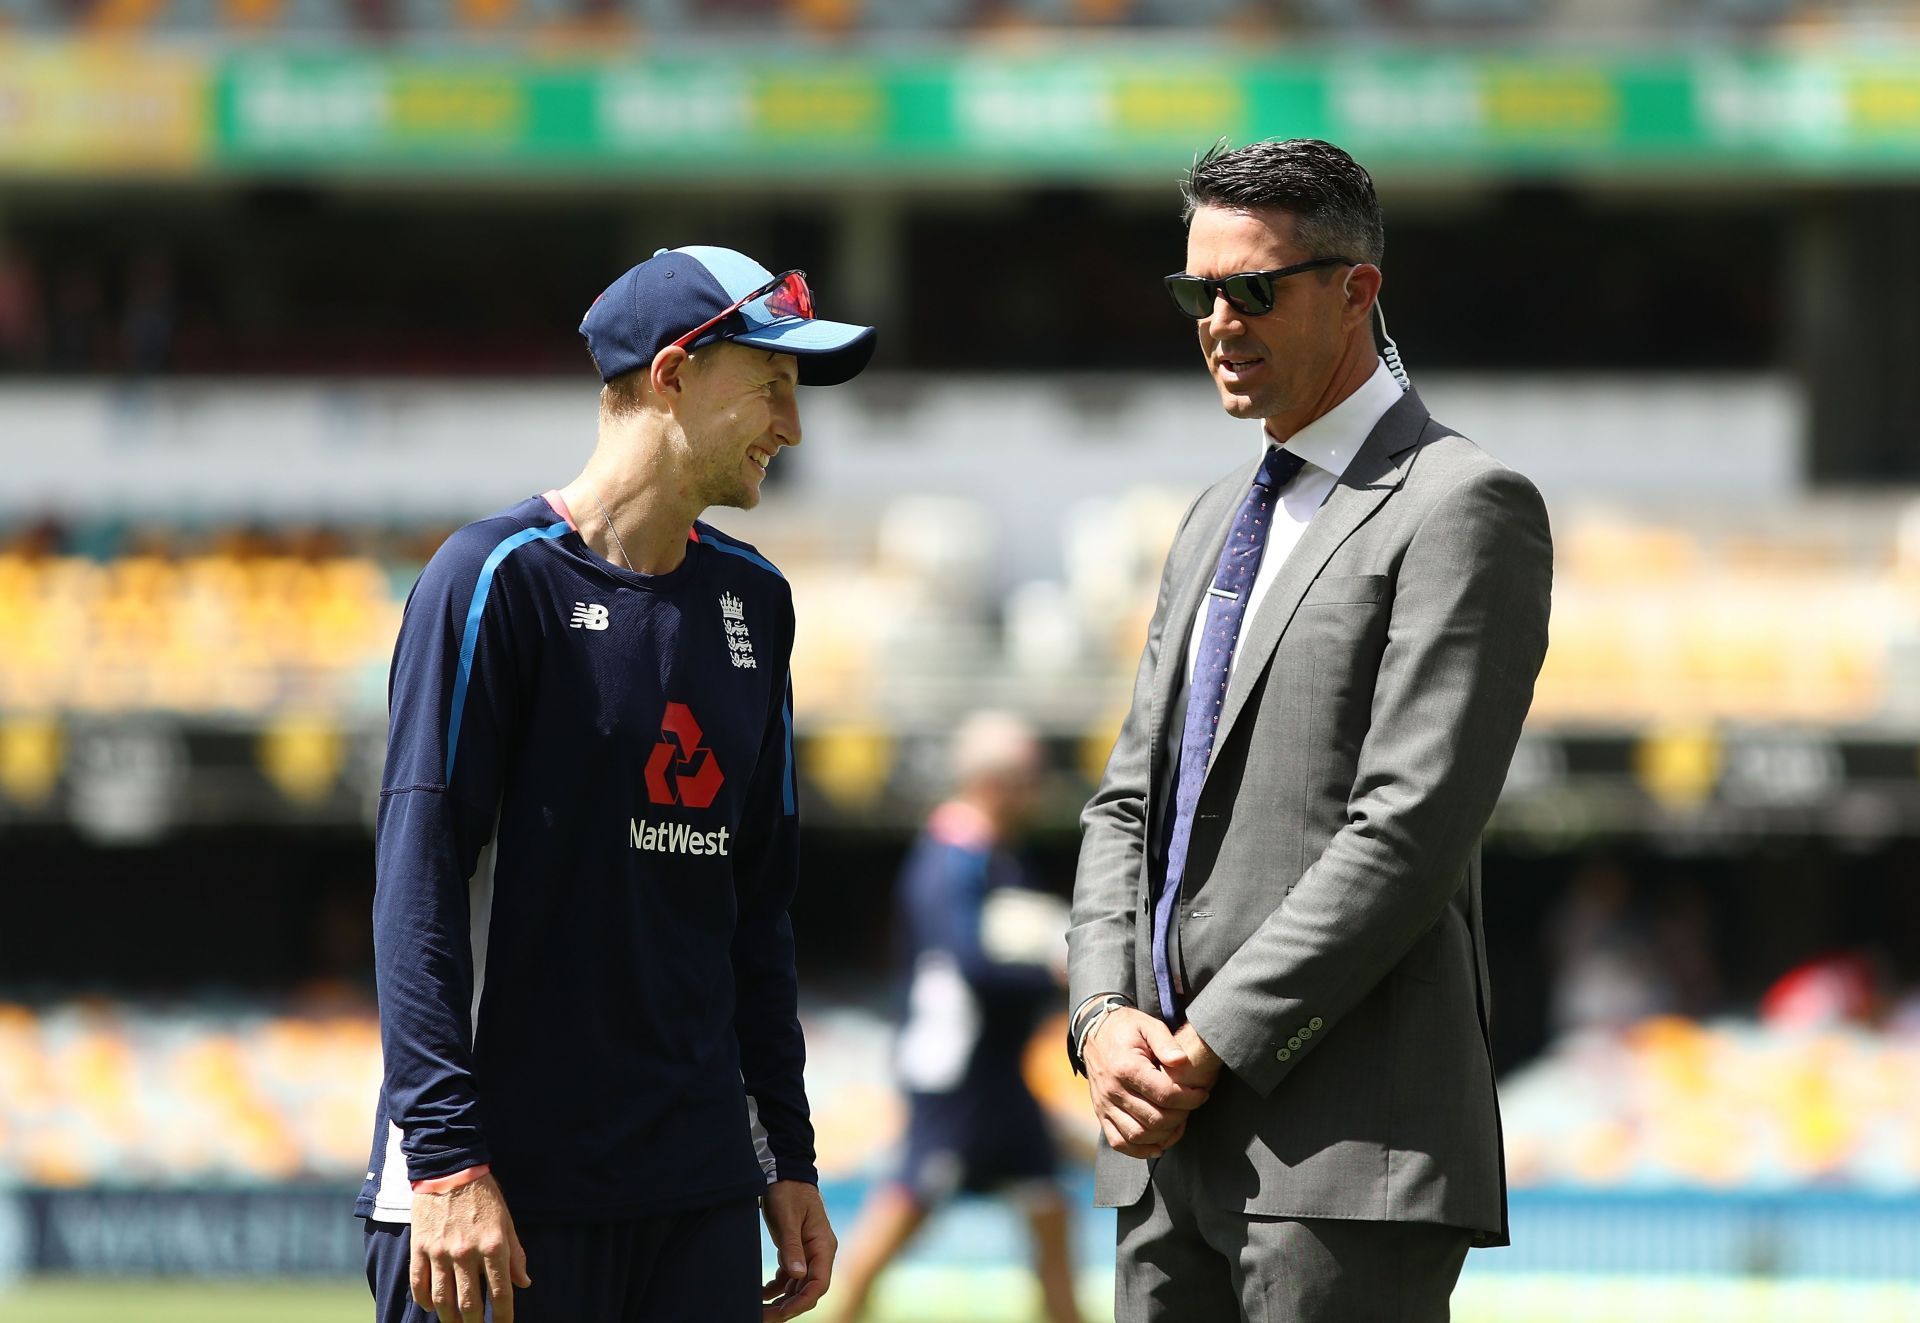 Joe Root(L) and Kevin Pietersen(R) Getty Images